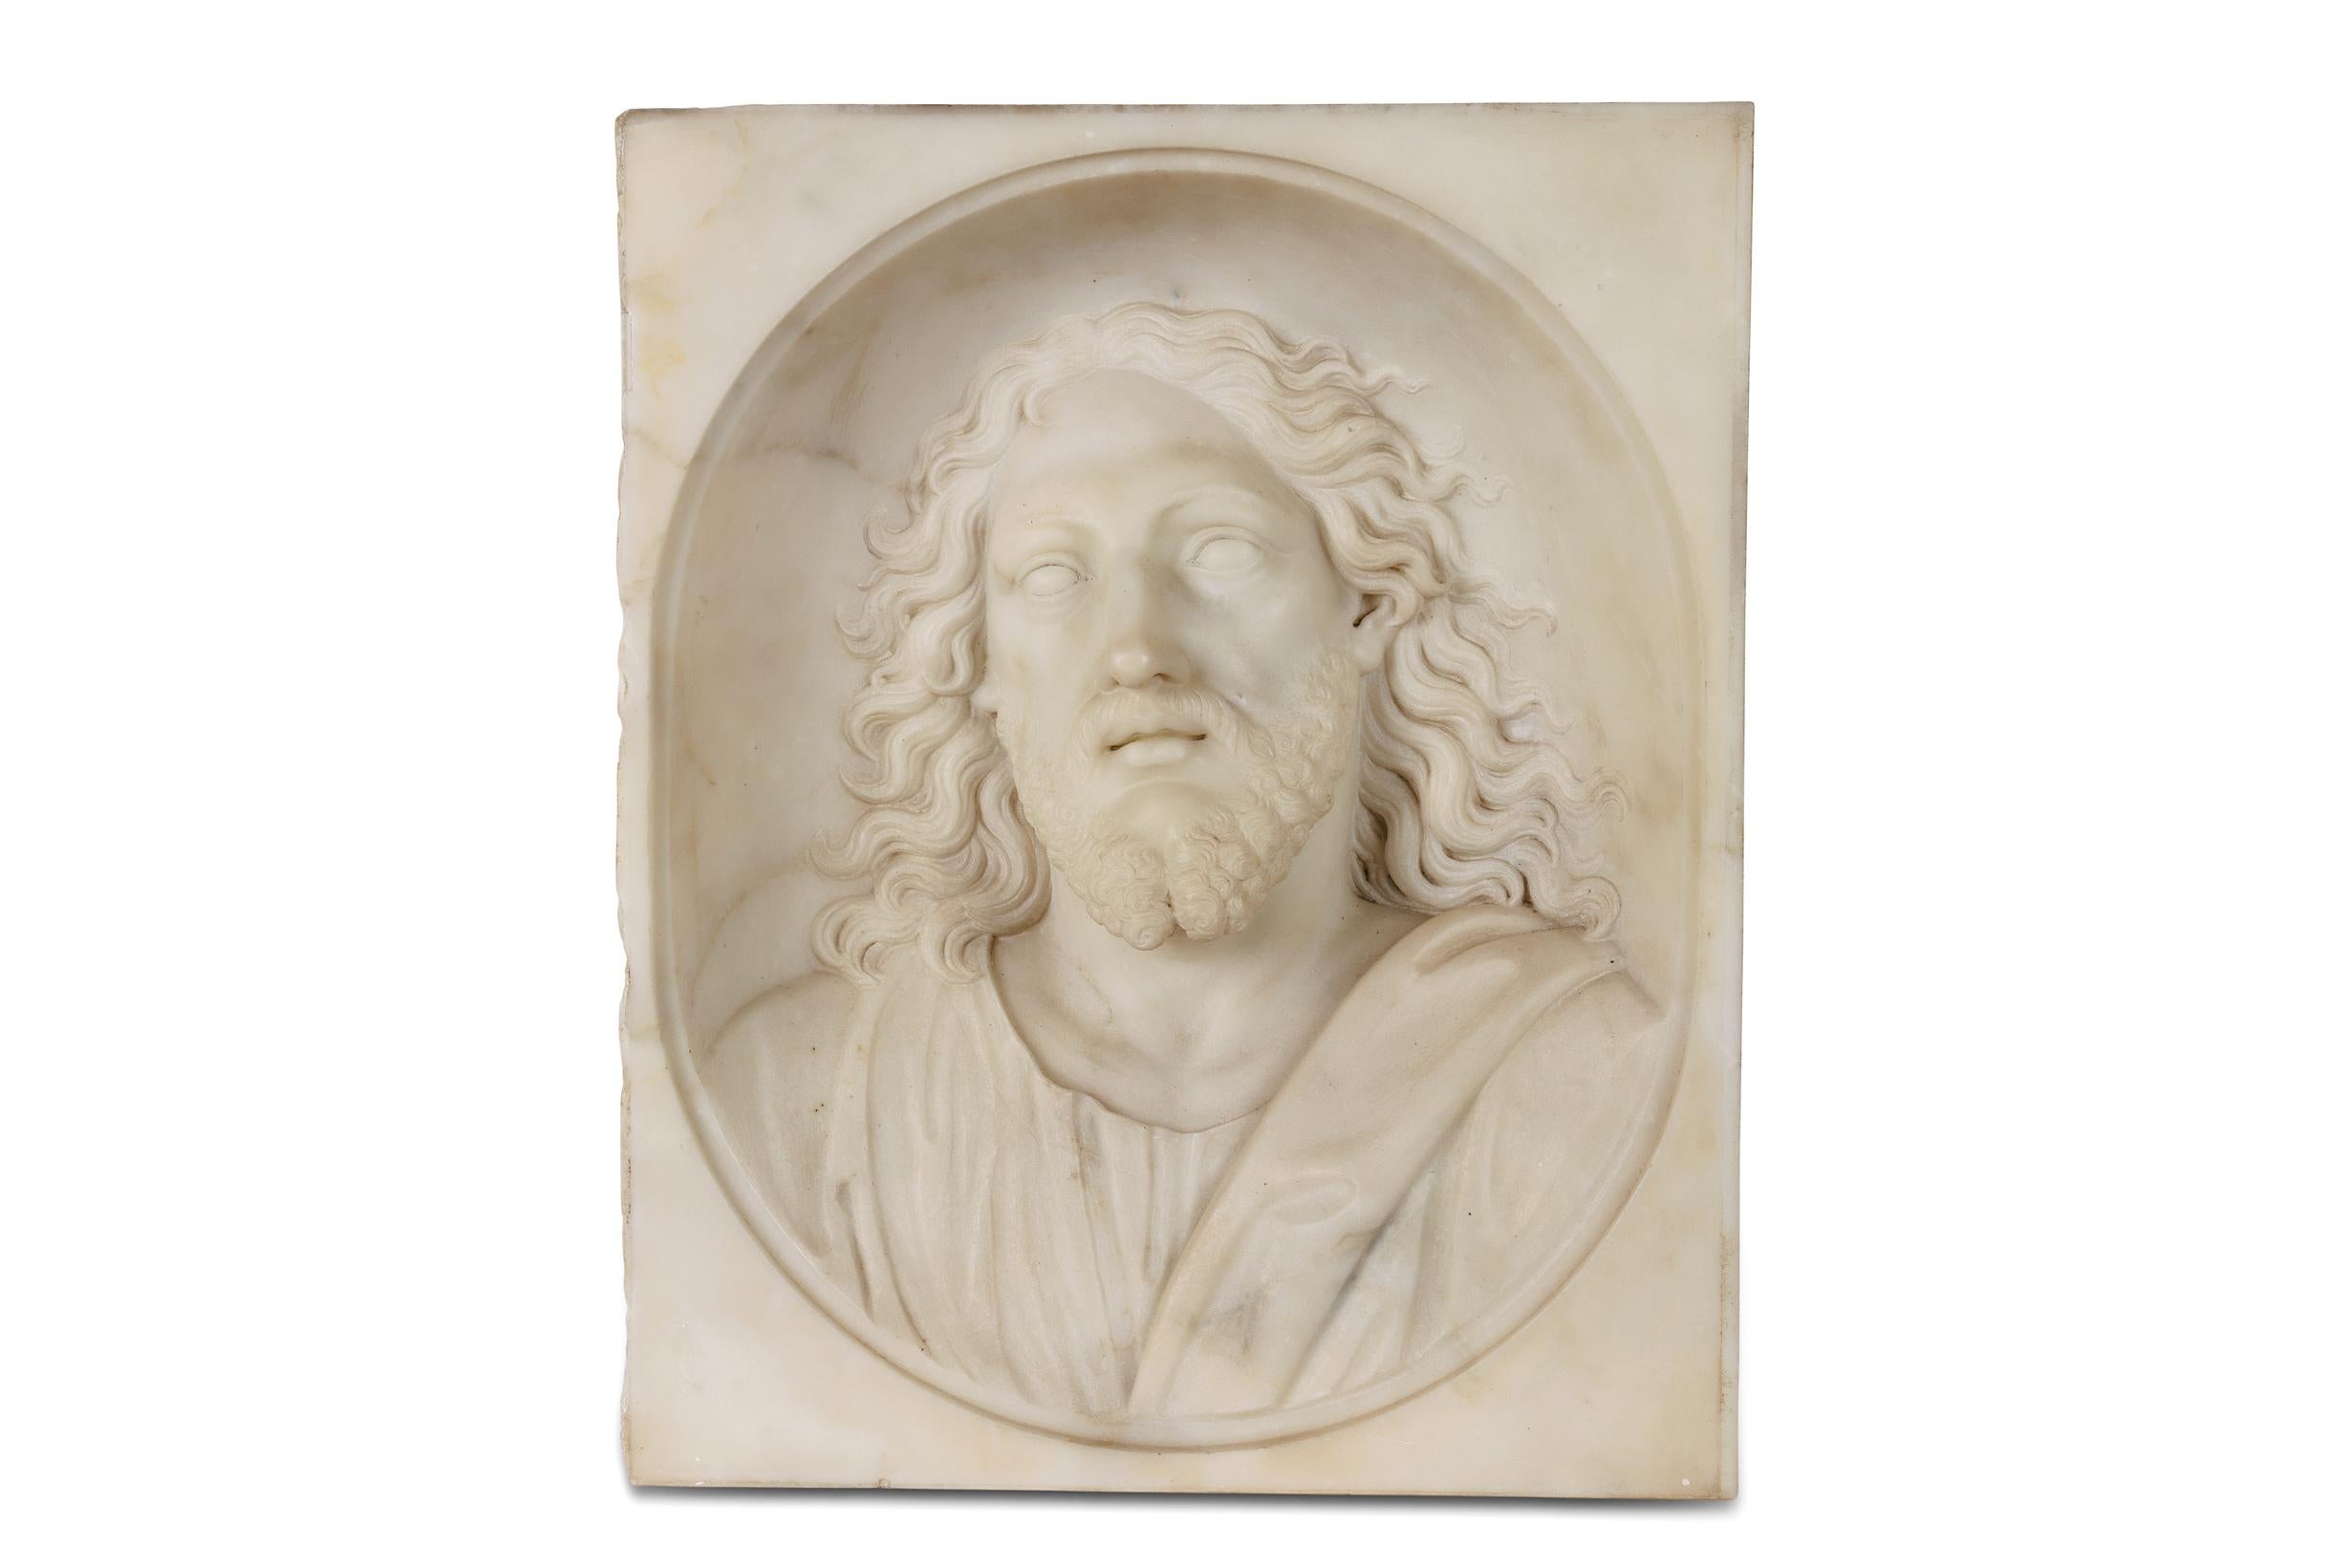 19th Century Rare and Important Italian White Marble Bust Sculpture of Jesus Christ, C. 1850 For Sale